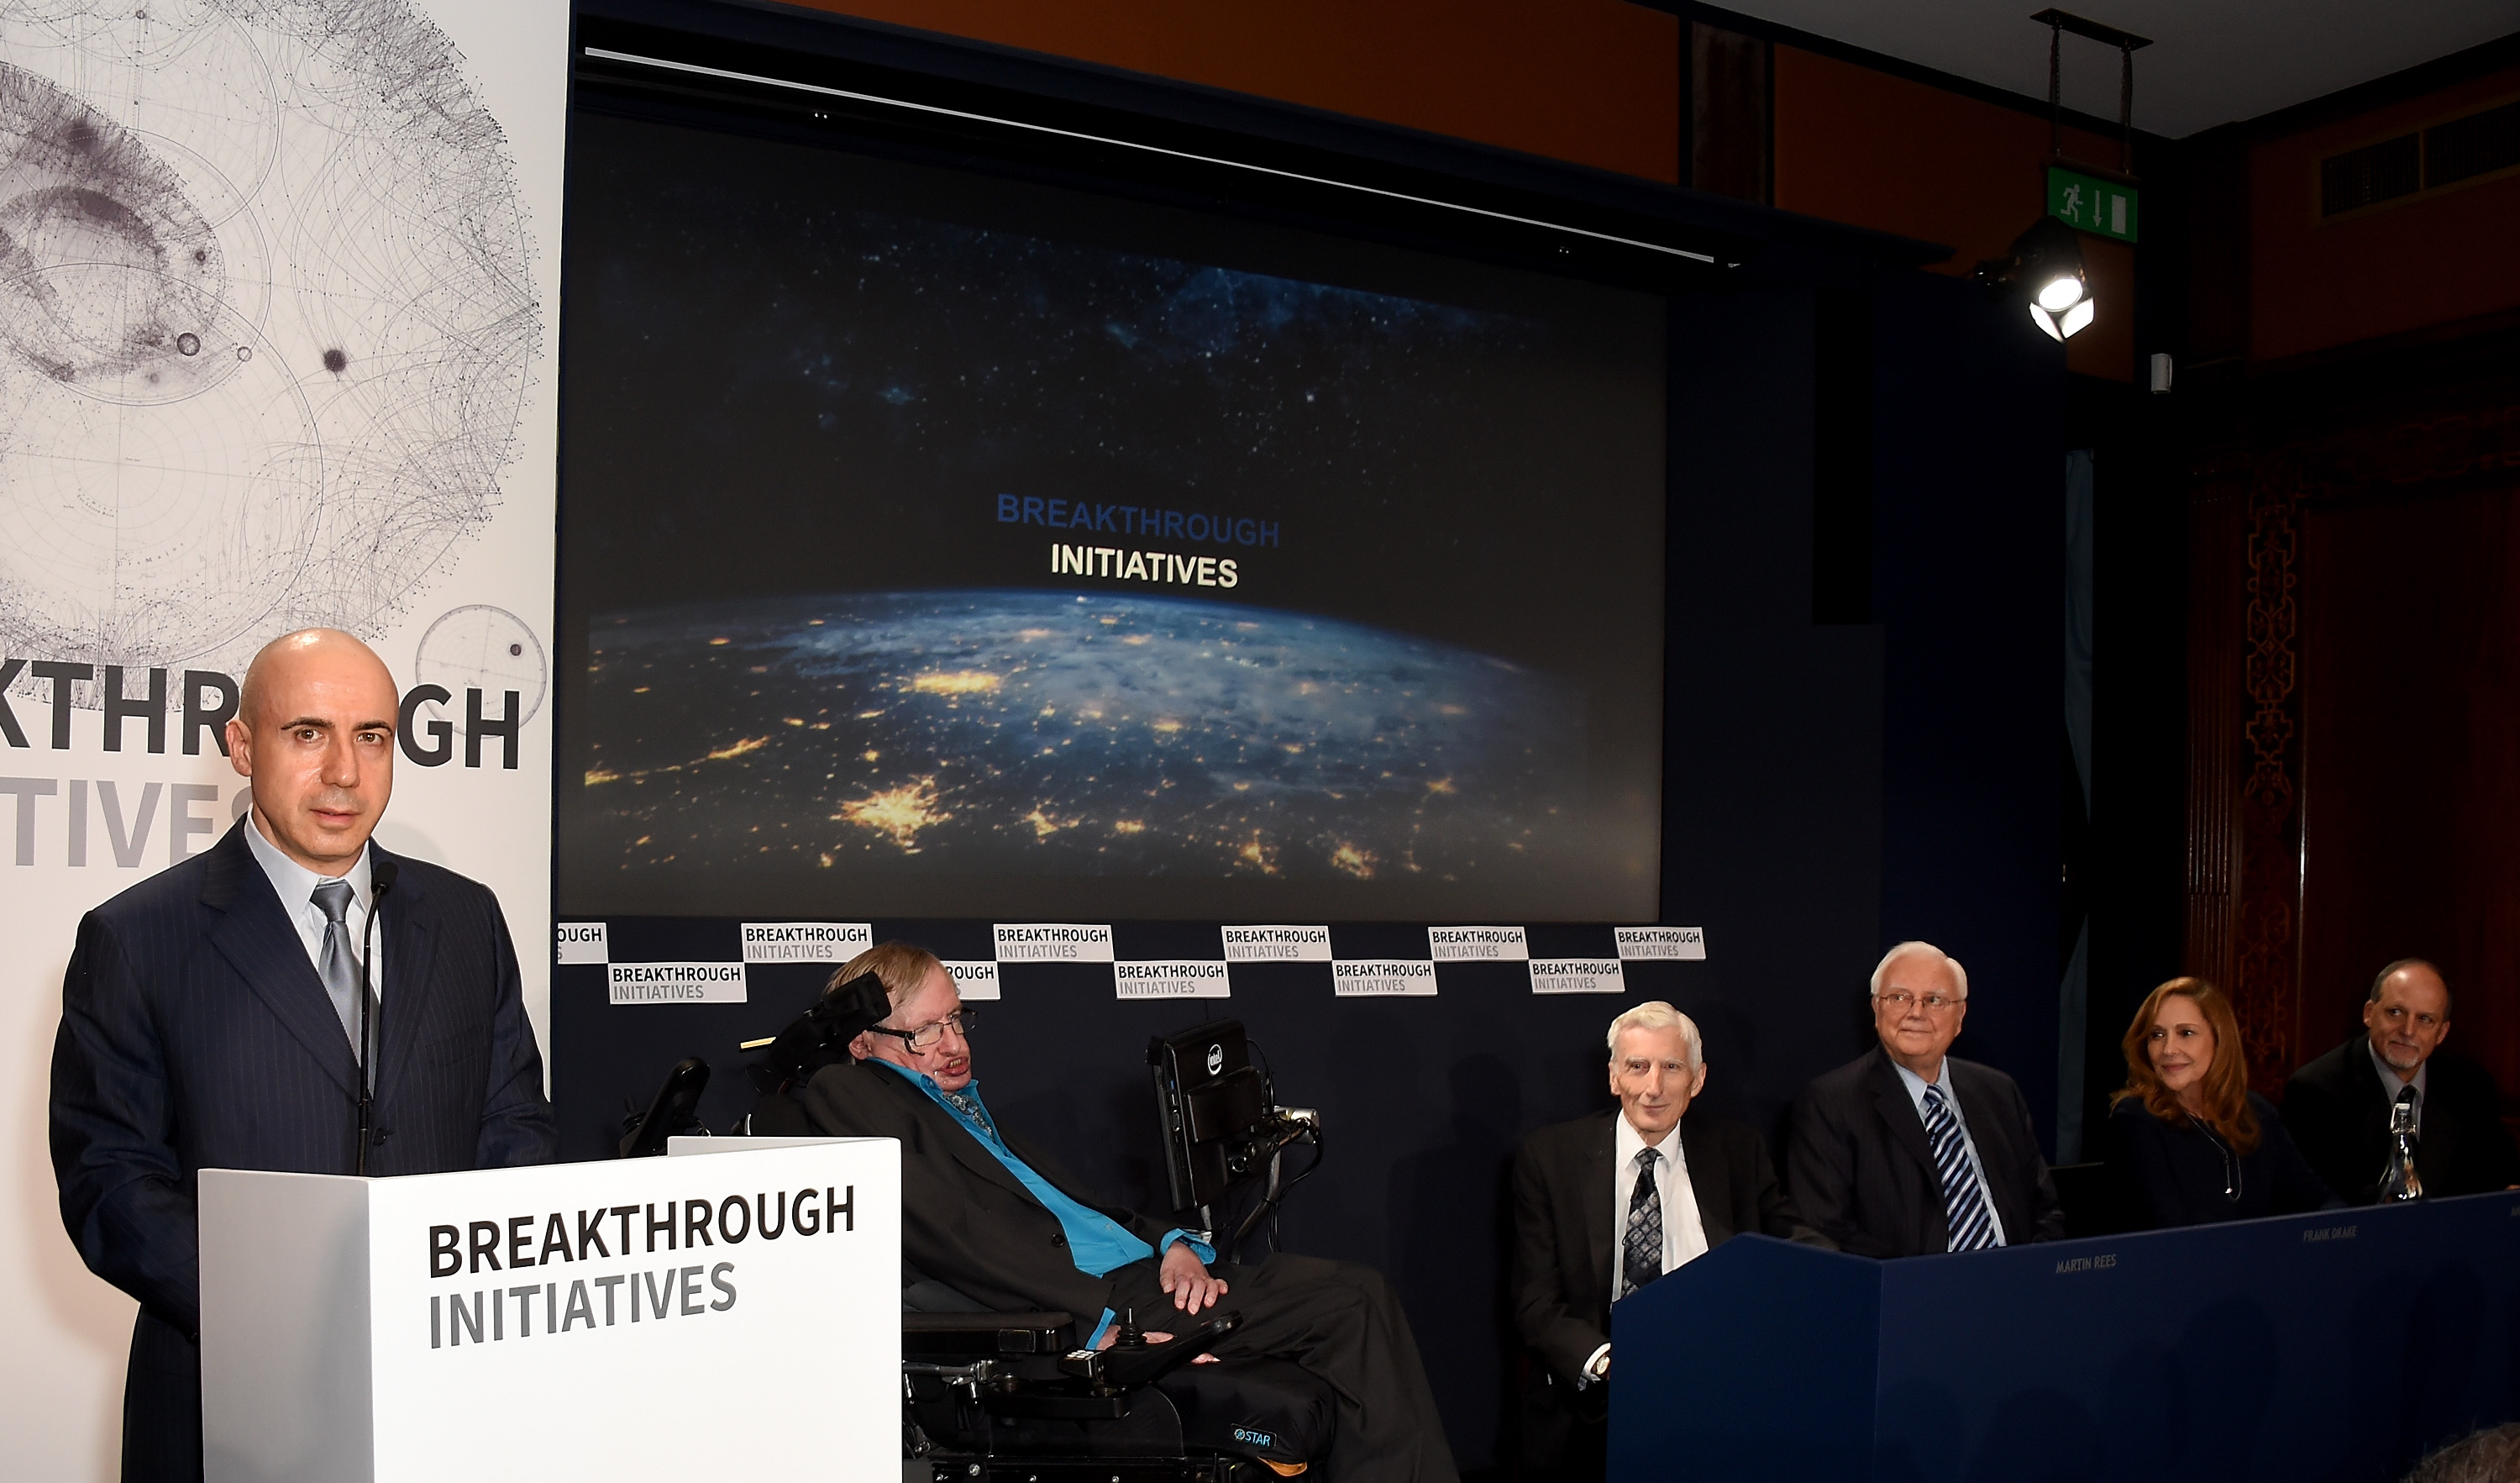 DST Global Founder Yuri Milner, Theoretical Physicist Stephen Hawking, Cosmologist and astrophysicist Lord Martin Rees, Chairman Emeritus, SETI Institute Frank Drake, Creative Director of the Interstellar Message, NASA Voyager Ann Druyan and Professor of Astronomy, University of California Geoff Marcy attend a press conference on the Breakthrough Life in the Universe Initiatives. (Stuart C. Wilson—Getty Images for Breakthrough Initiatives)